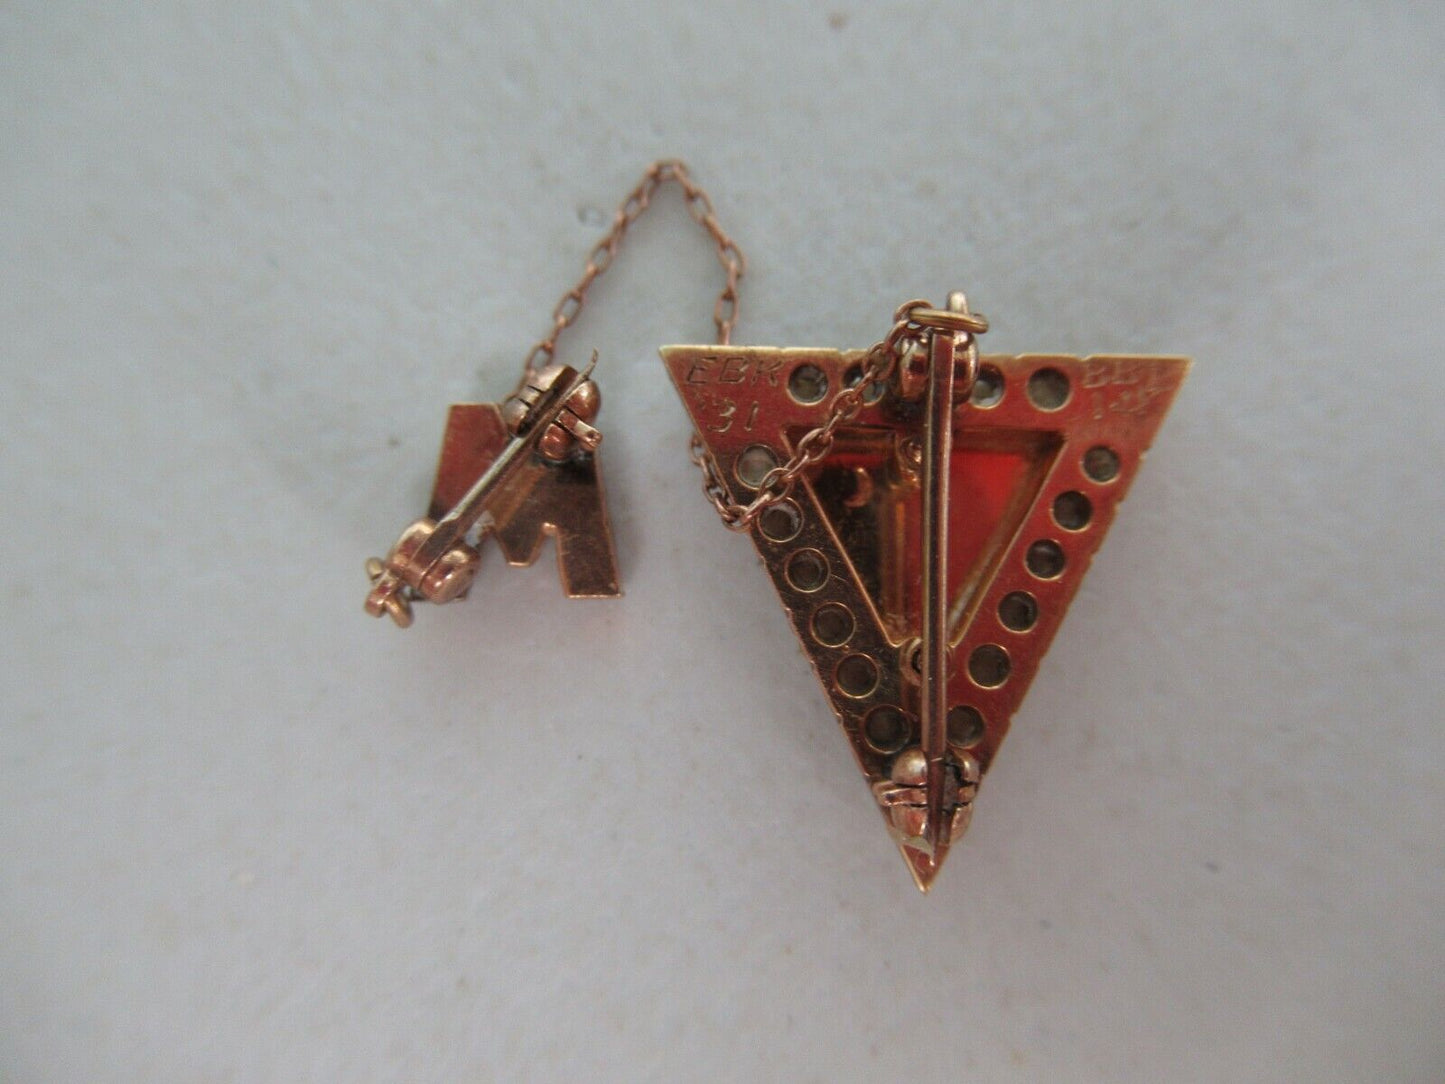 USA FRATERNITY PIN PI MU. MADE IN GOLD 14K. DATED 1931. NAMED. MARKED.